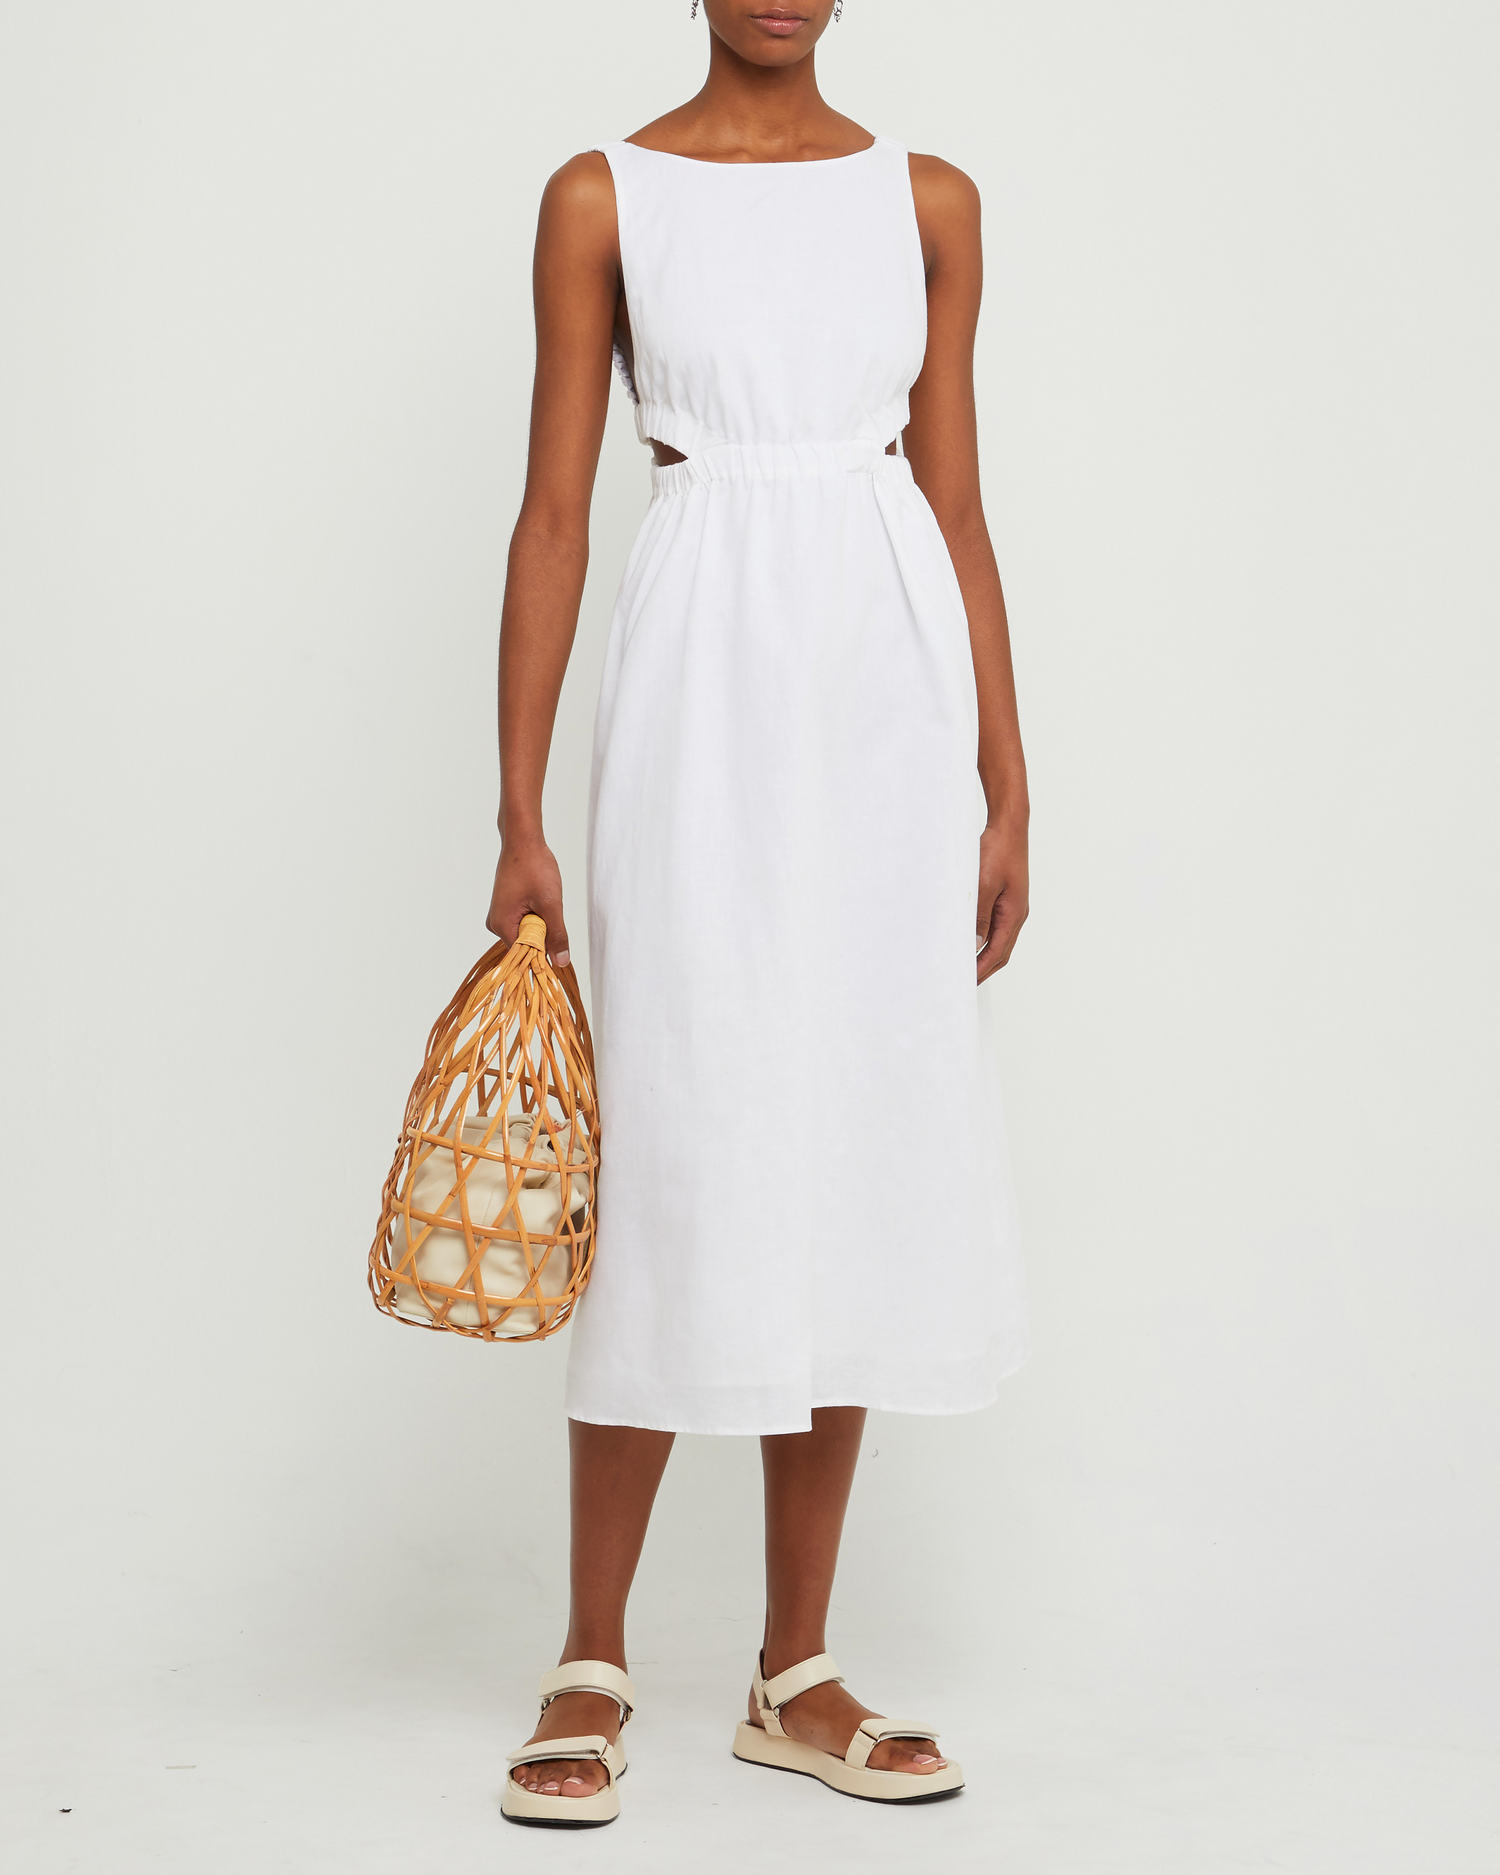 First image of Aubrielle Dress, a white midi dress, open back, cut out, high neckline, sleeveless